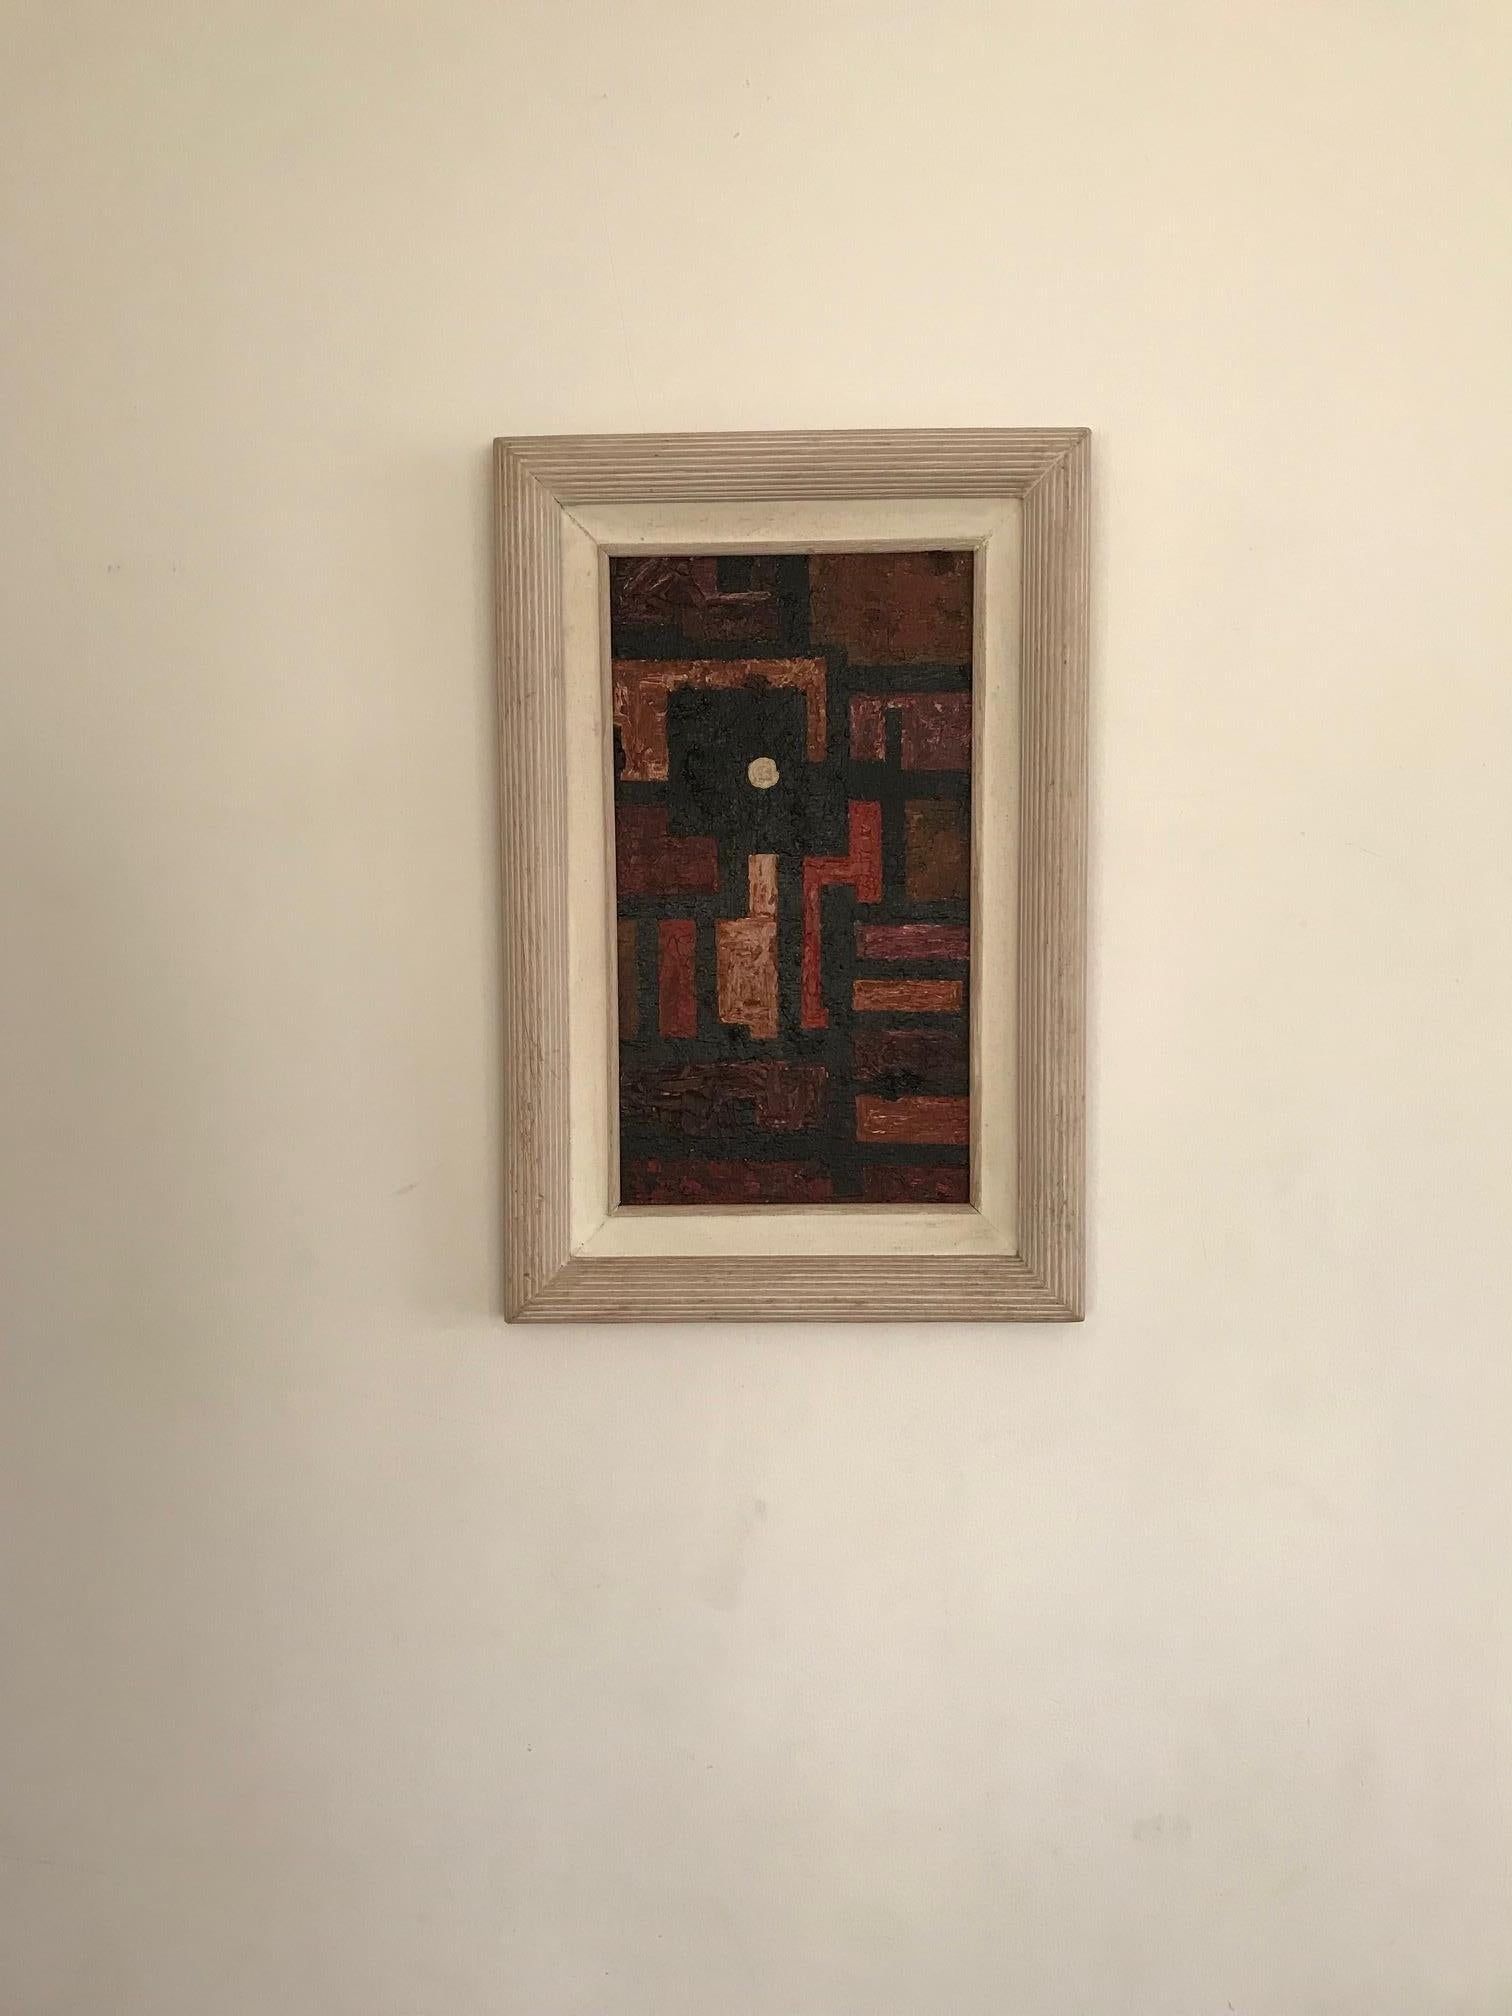 A British 1960s small abstract painting. Thick oil impasto on board in original frame. Signed verso Gordon Faulkner. Dated 1964 and titled Square & Spot. Good piece of 1960s abstract art.